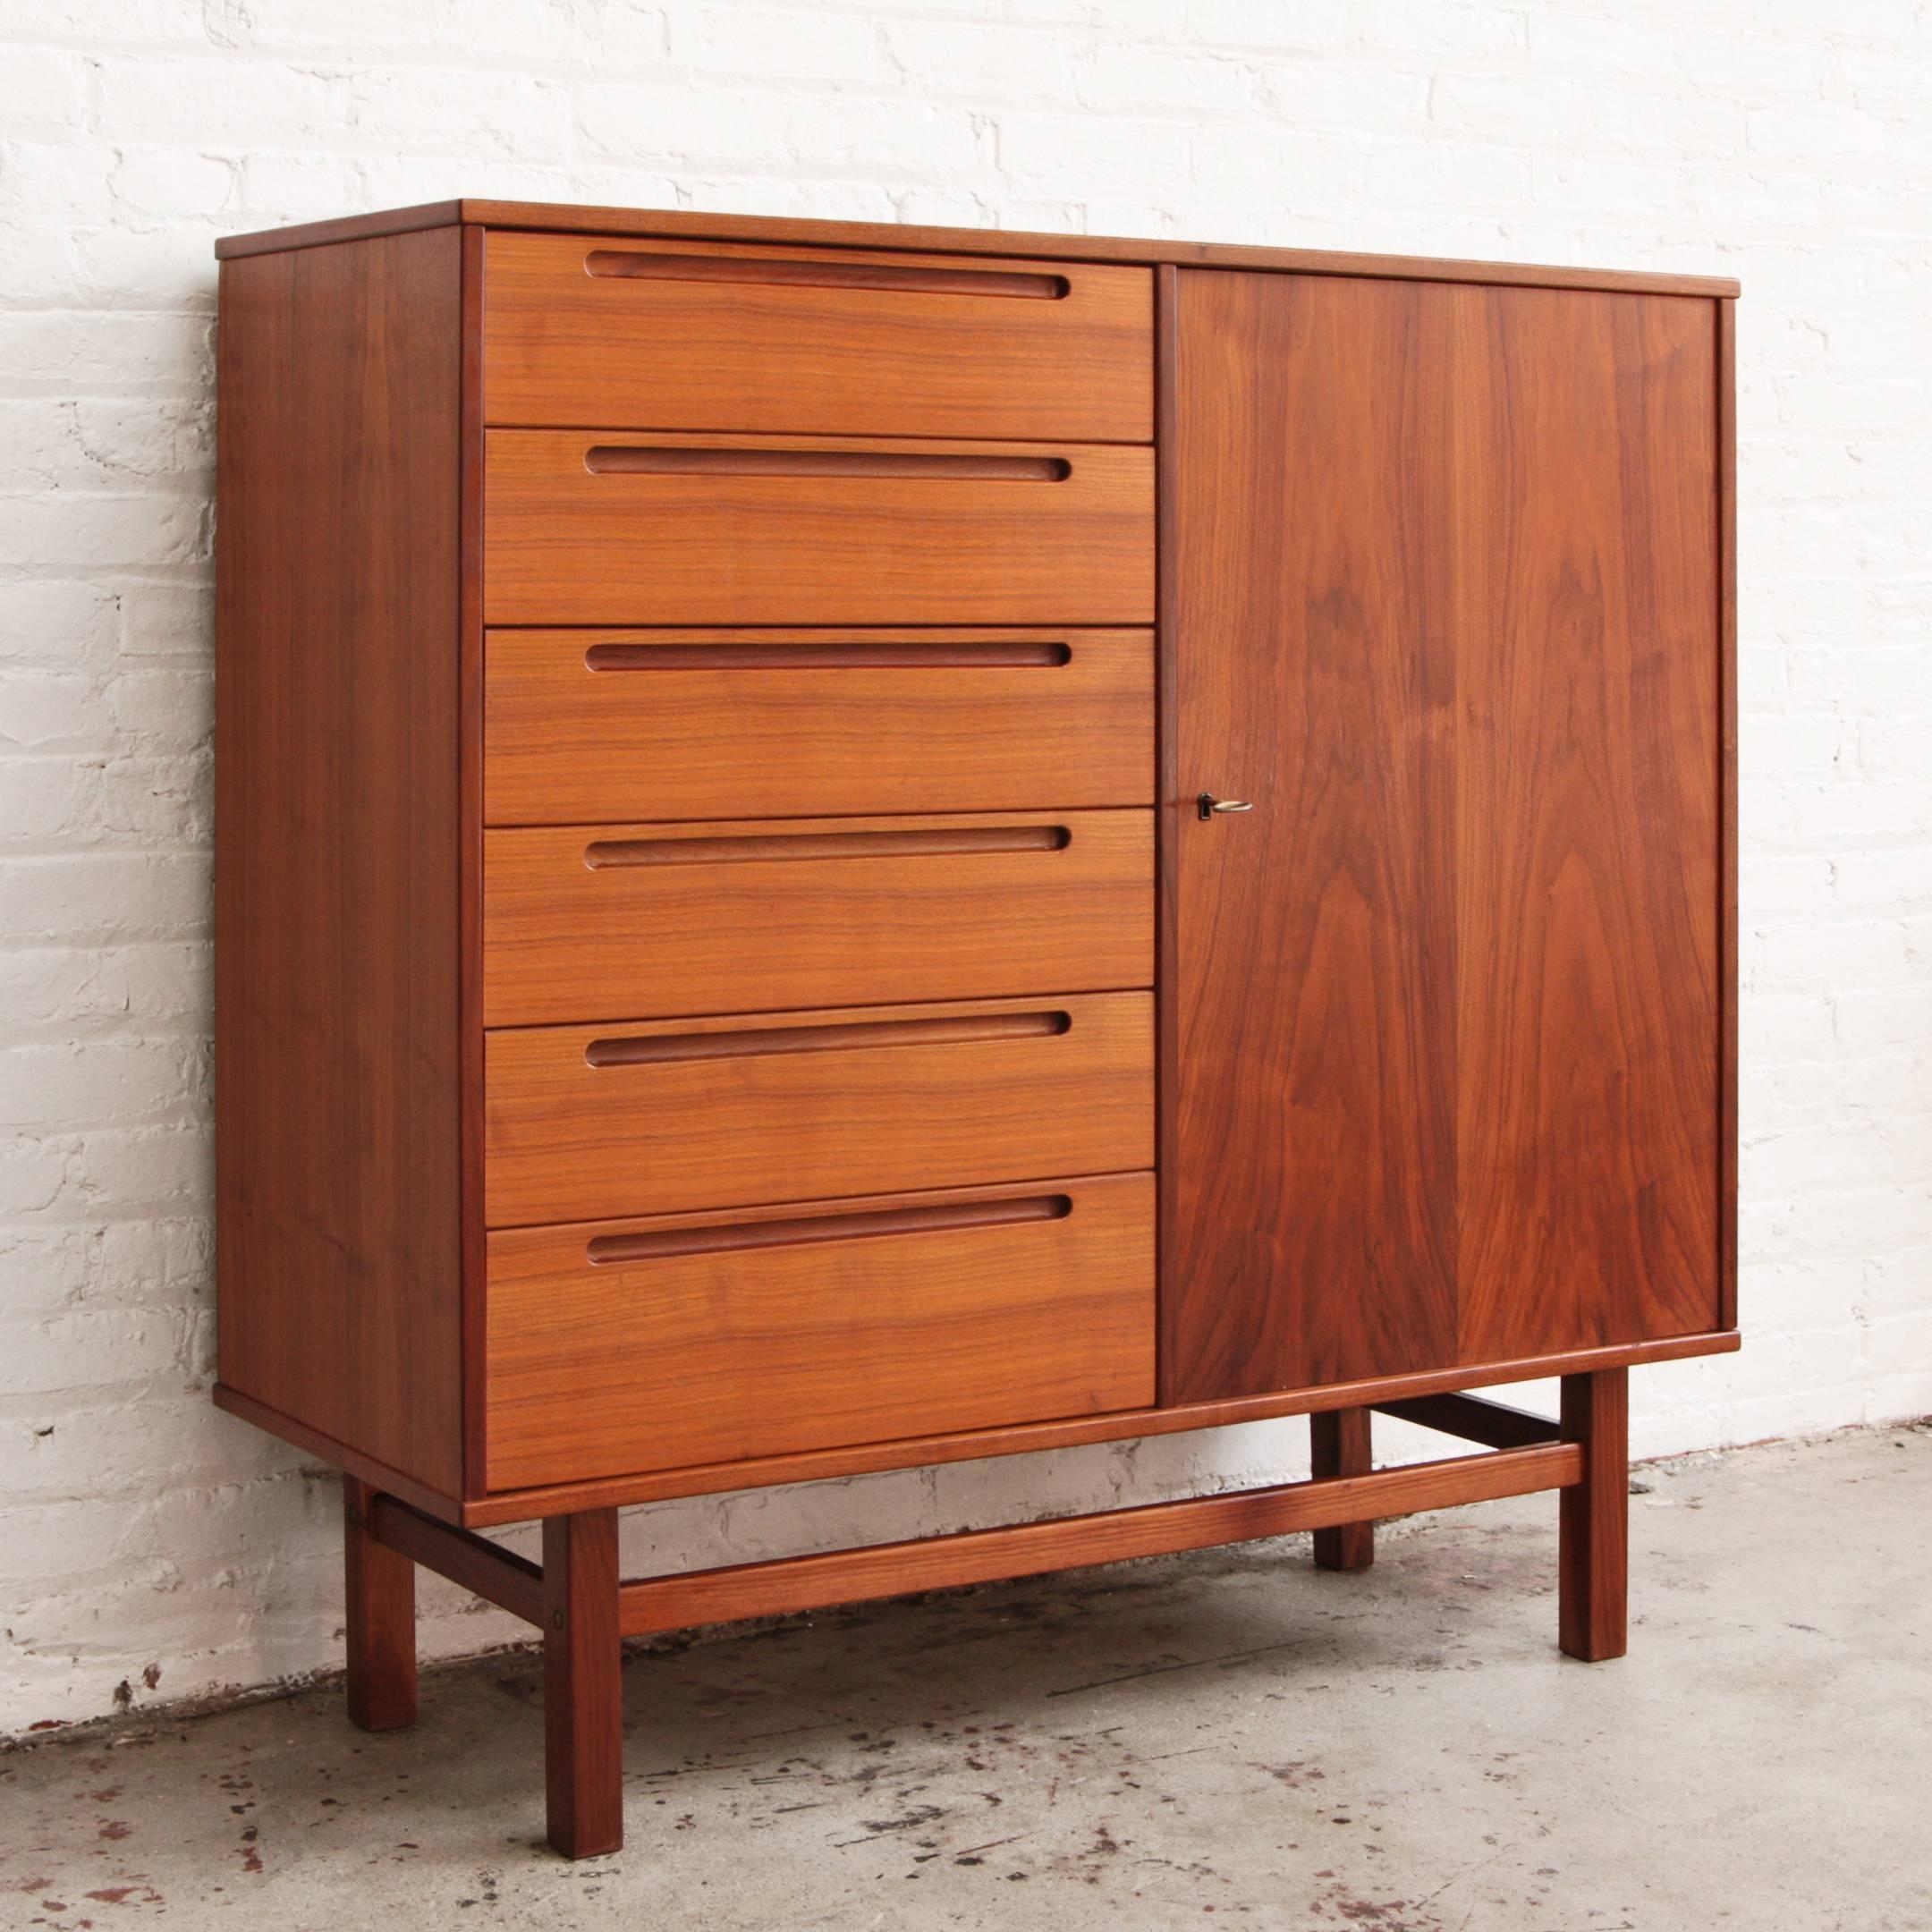 Nils Jonsson for HJN Mobler teak tallboy or chest of drawers. Six large drawers and six thin blonde interior drawers. Locks with key.